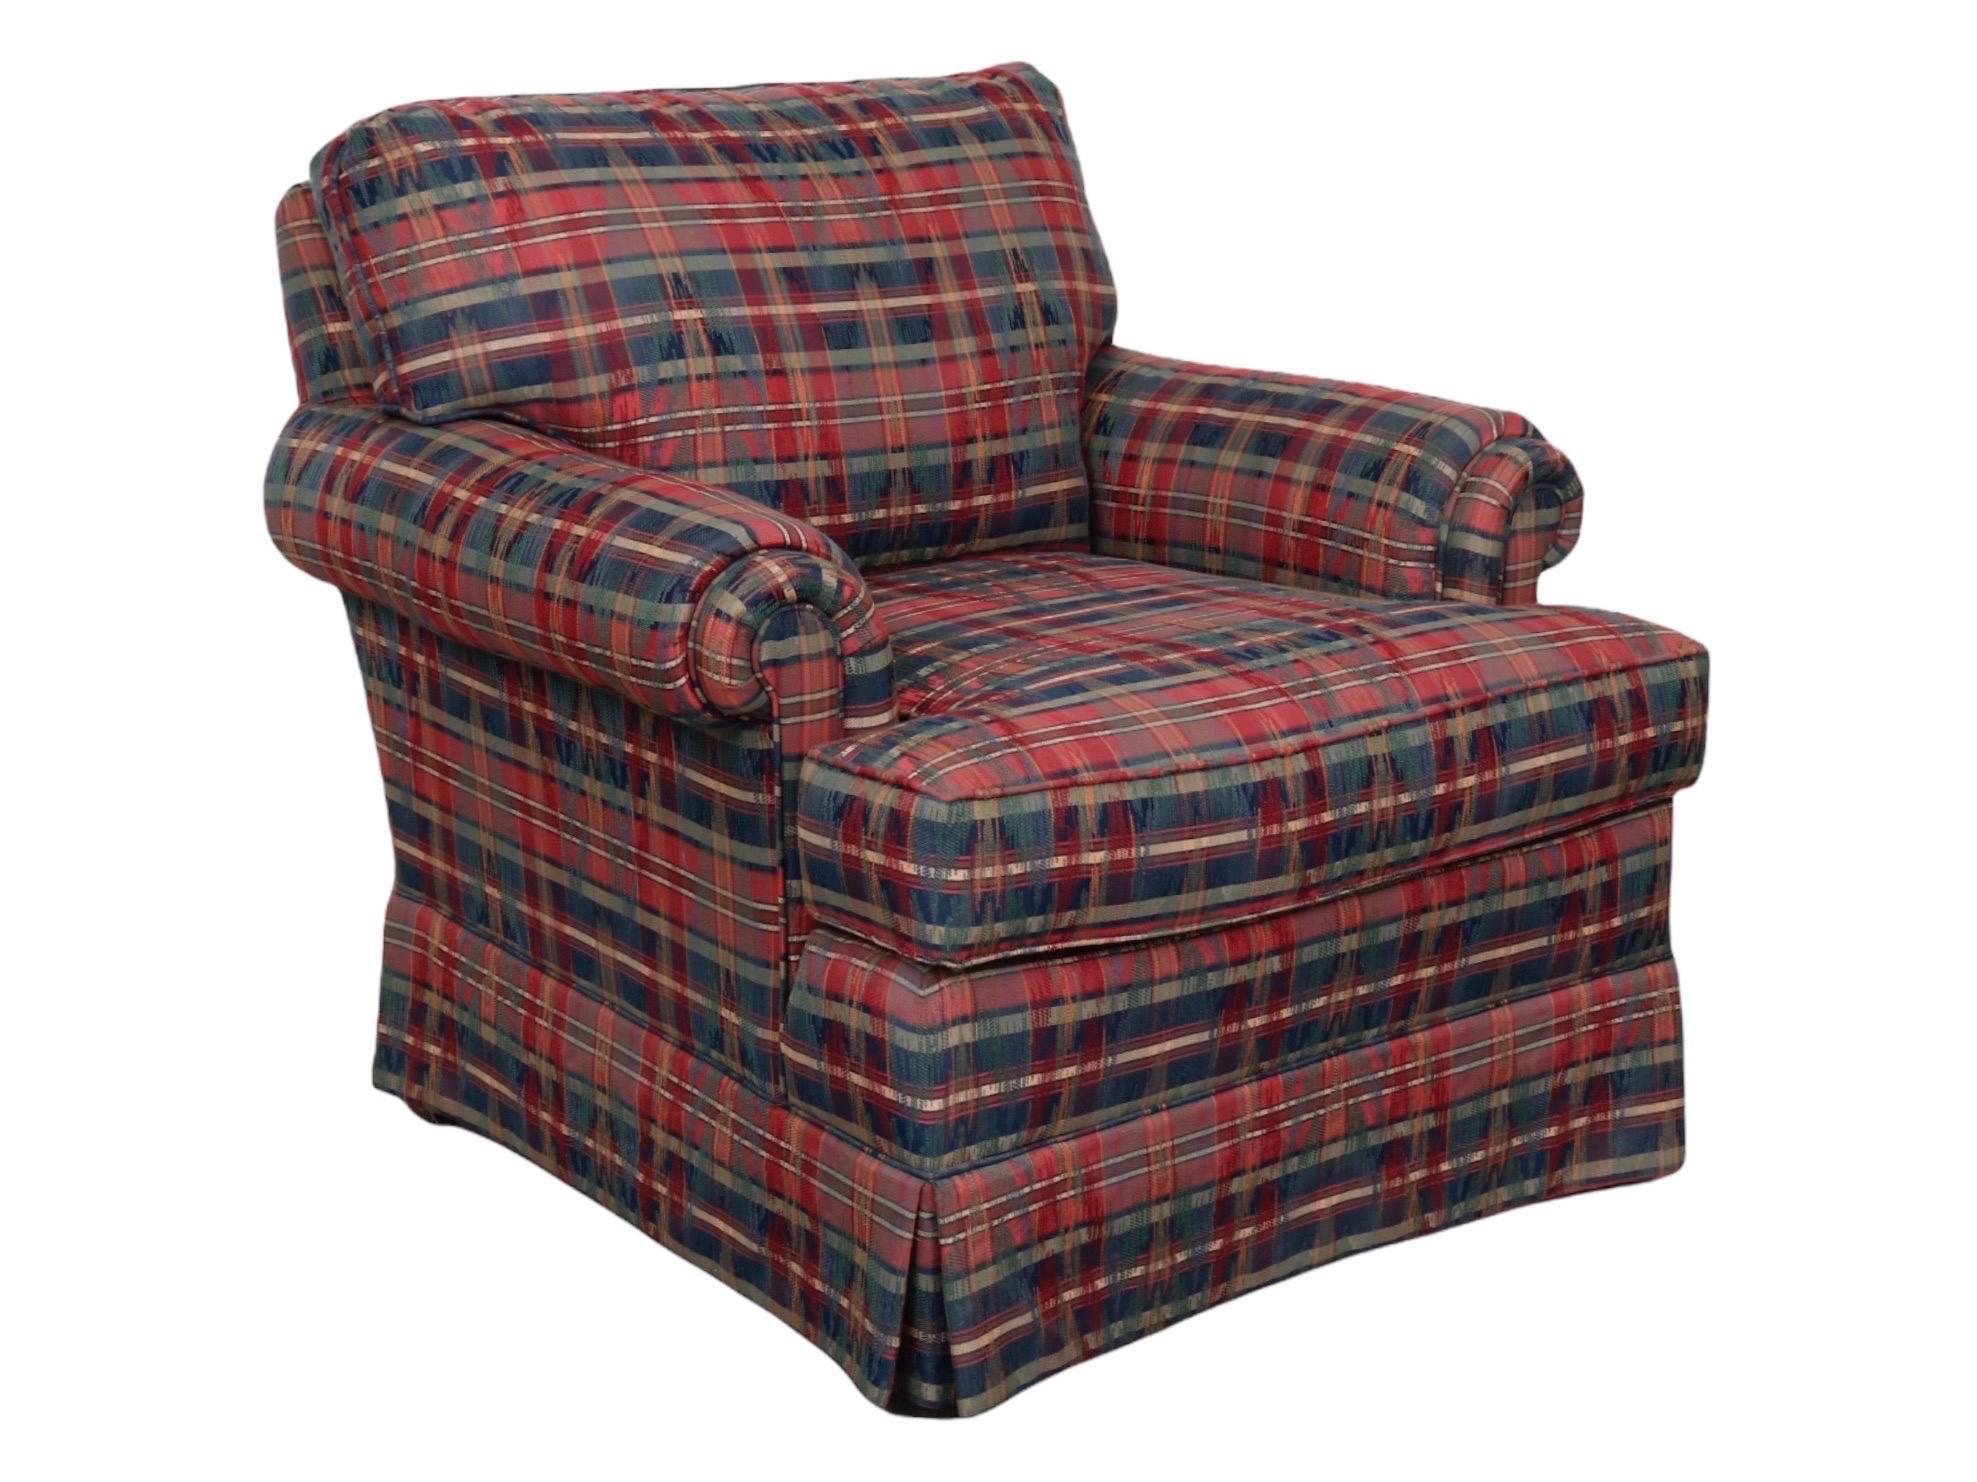 A transitional upholstered armchair made by Wesley Hall of Hickory, North Carolina. A square back and seat are framed with pad roll arms, upholstered throughout in a sophisticated two patterned jacquard fabric. A dominant red, navy and cream